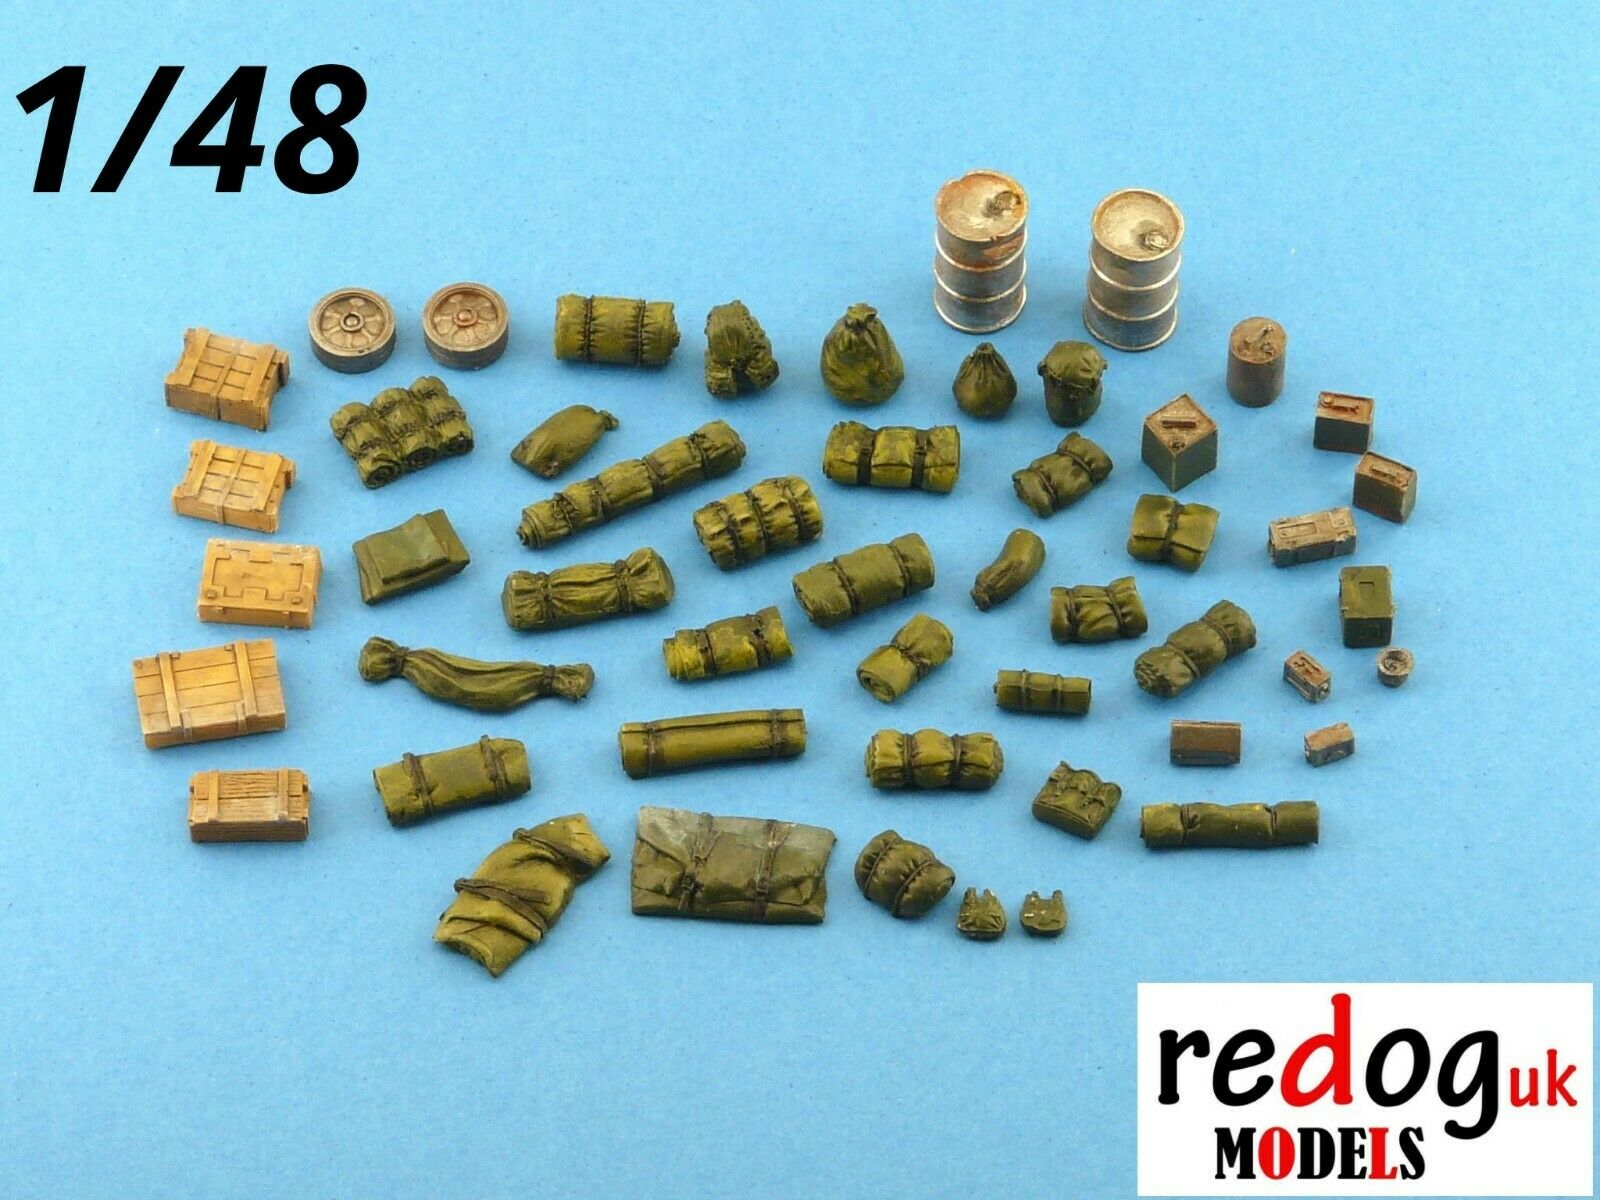 1:/48 Military Scale Modelling Resin Stowage Kit Diorama Accessories Kit 2 - redoguk